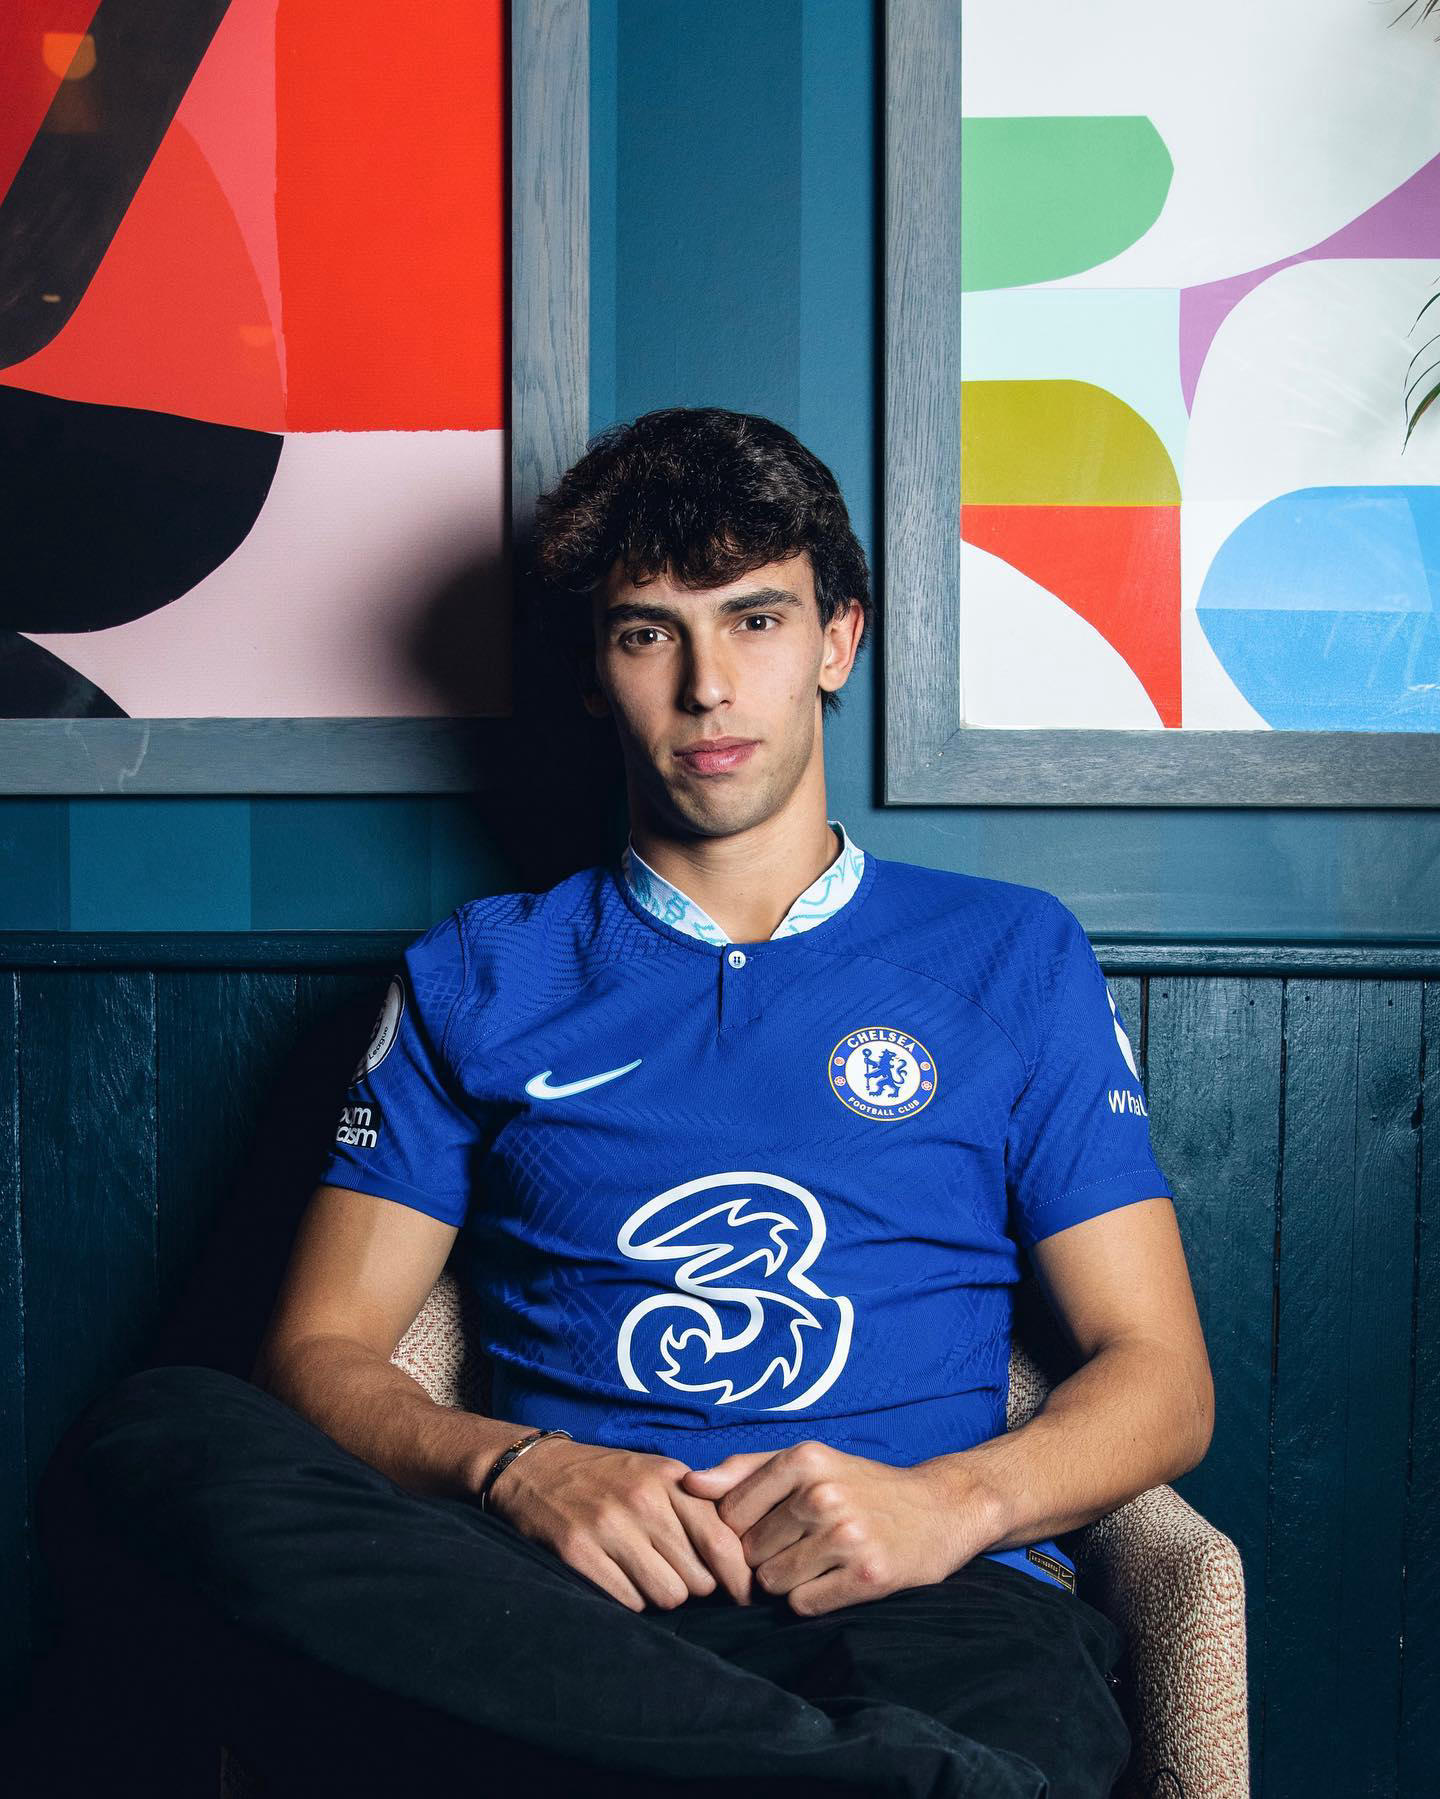 Chelsea FC - The artist has arrived